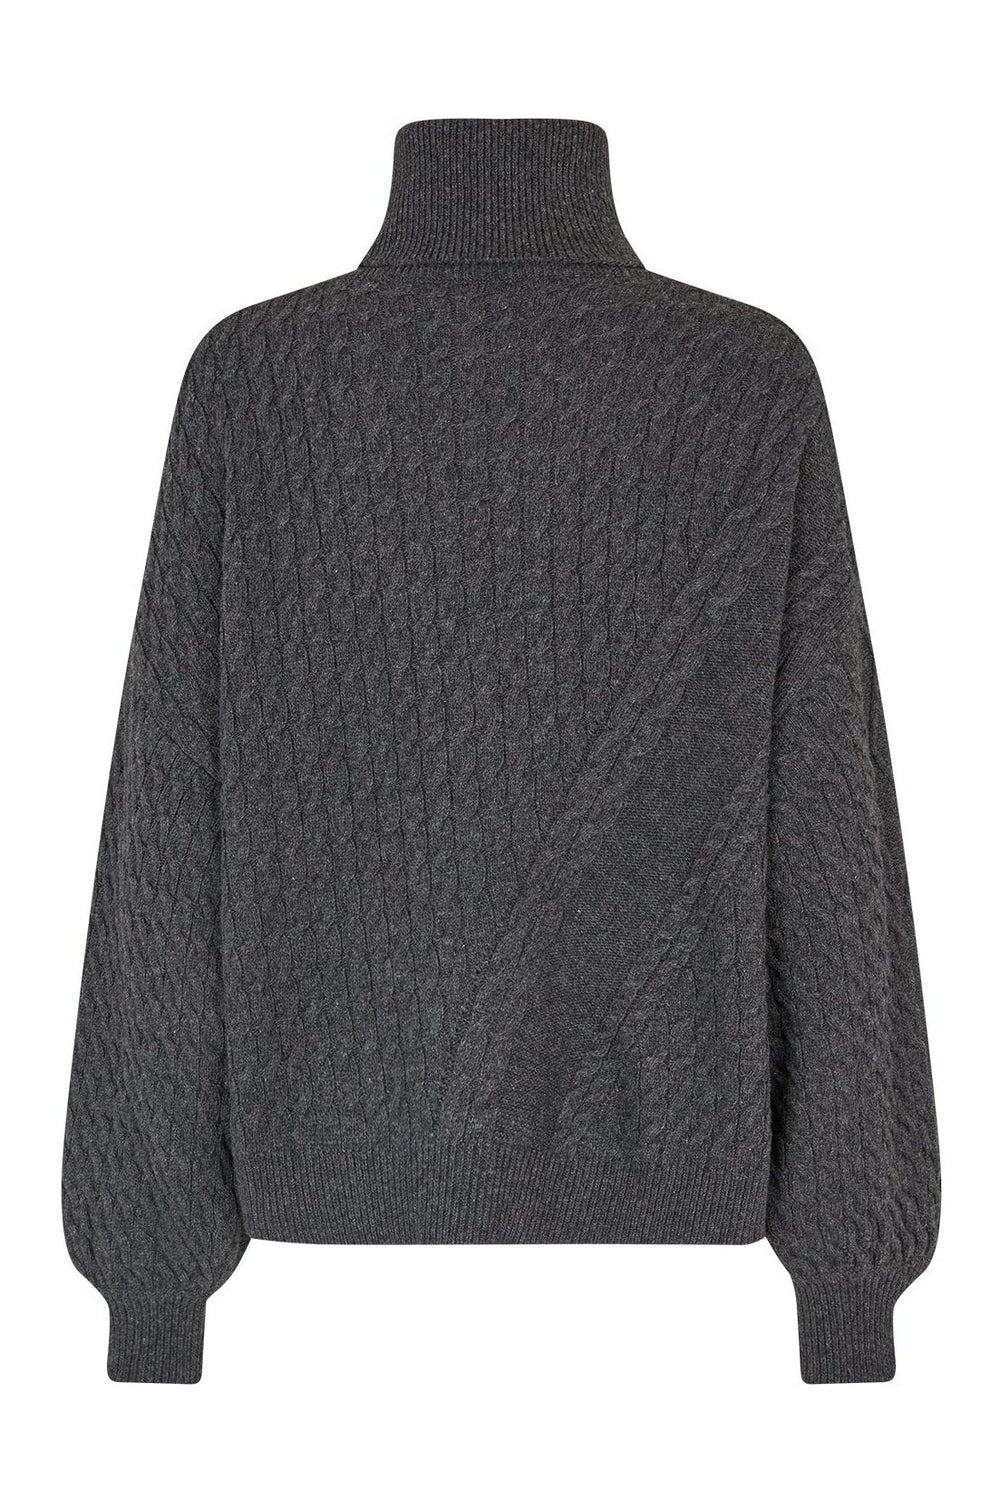 Mads Nørgaard | Sweater | Recycled Wool Mix Rerik, charcoal melange